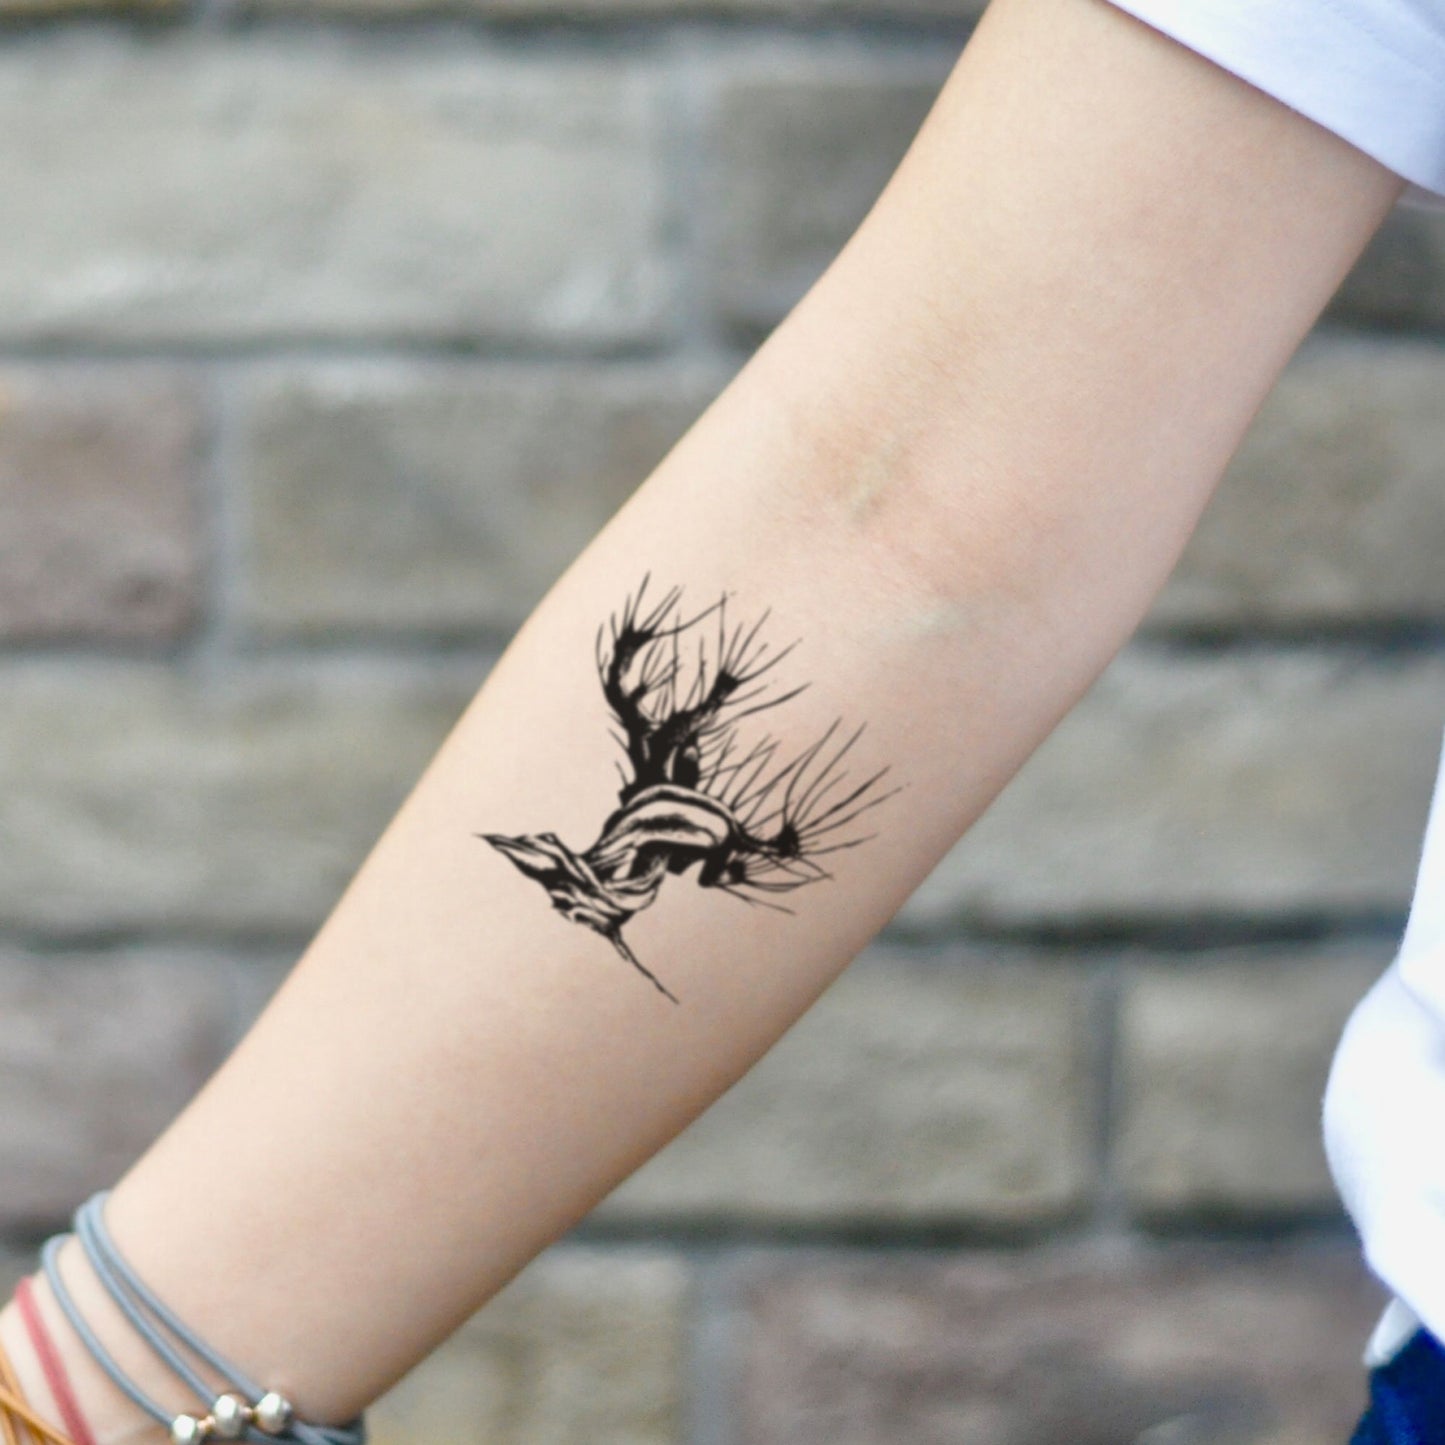 fake small whomping willow harry potter weeping tree nature temporary tattoo sticker design idea on inner arm